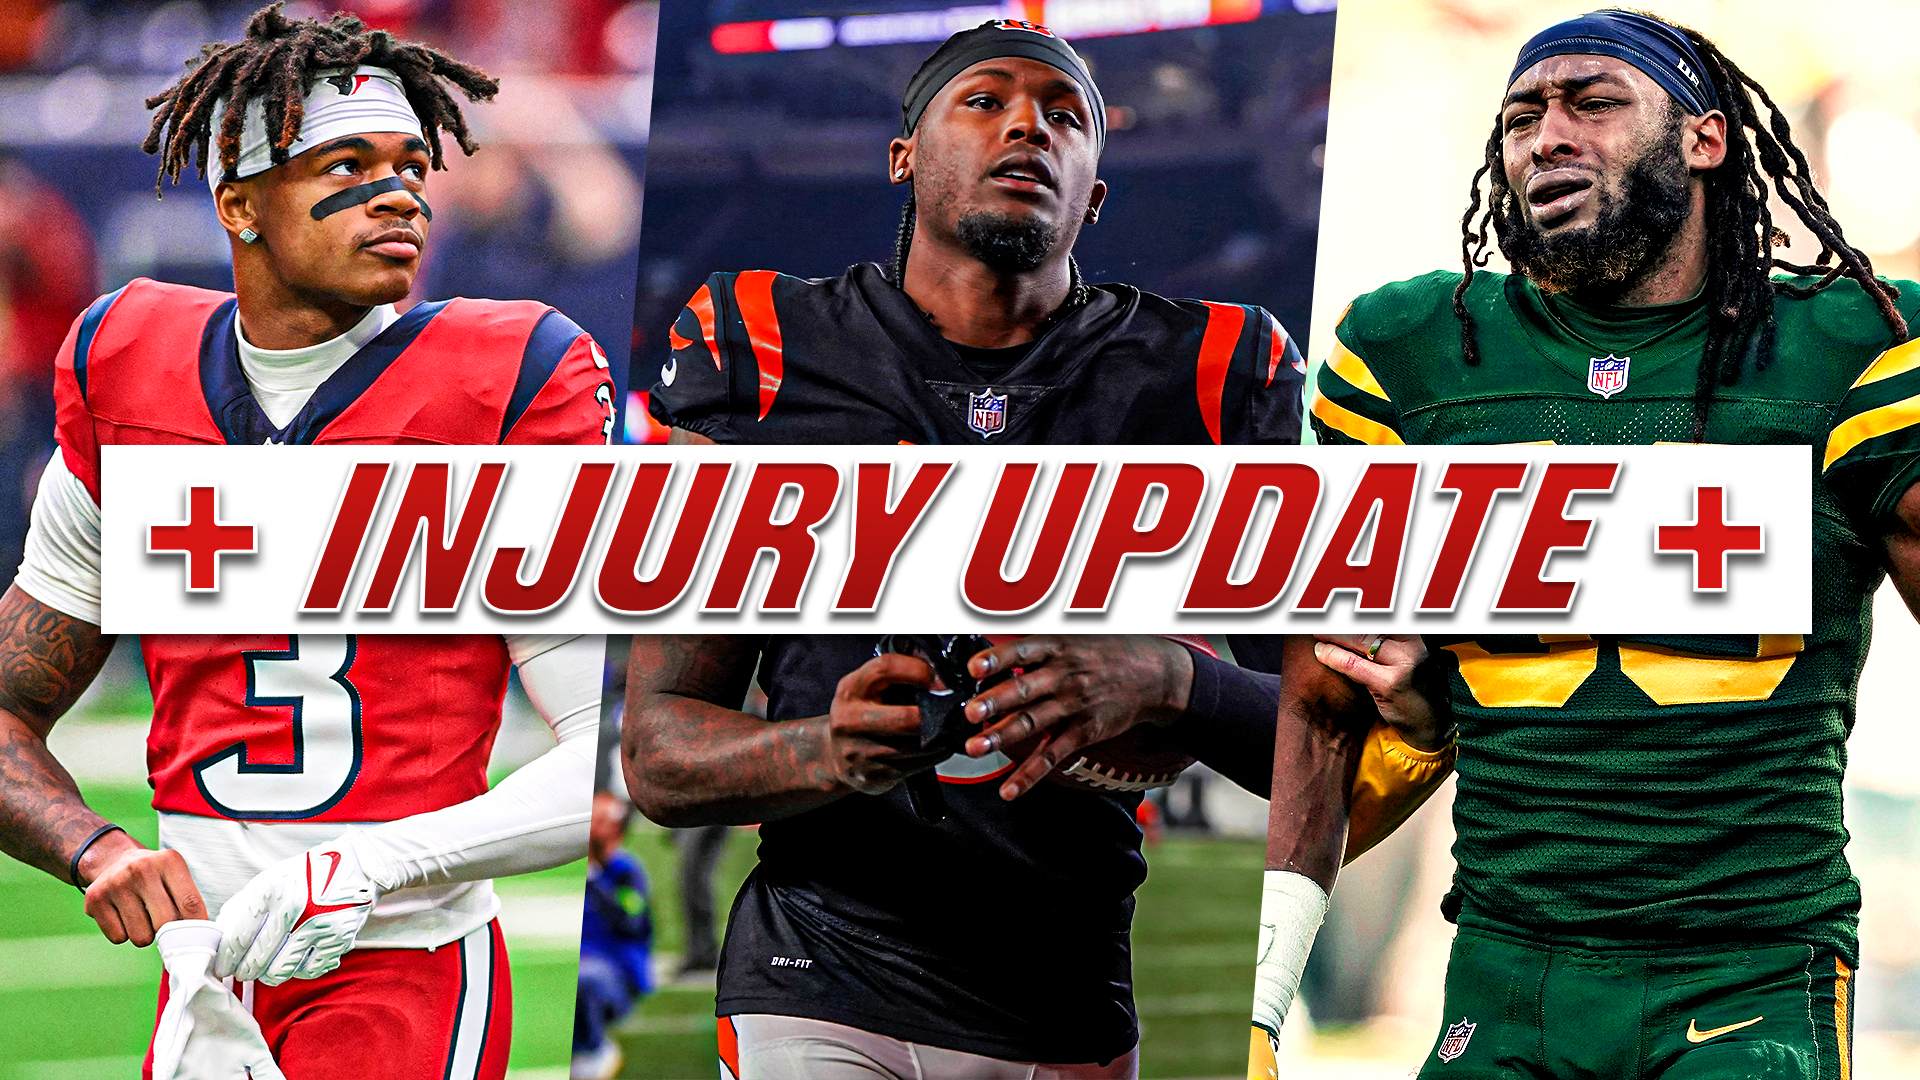 Images of Tank Dell, Tee Higgins and Aaron Jones with text that reads "Injury Update" in red